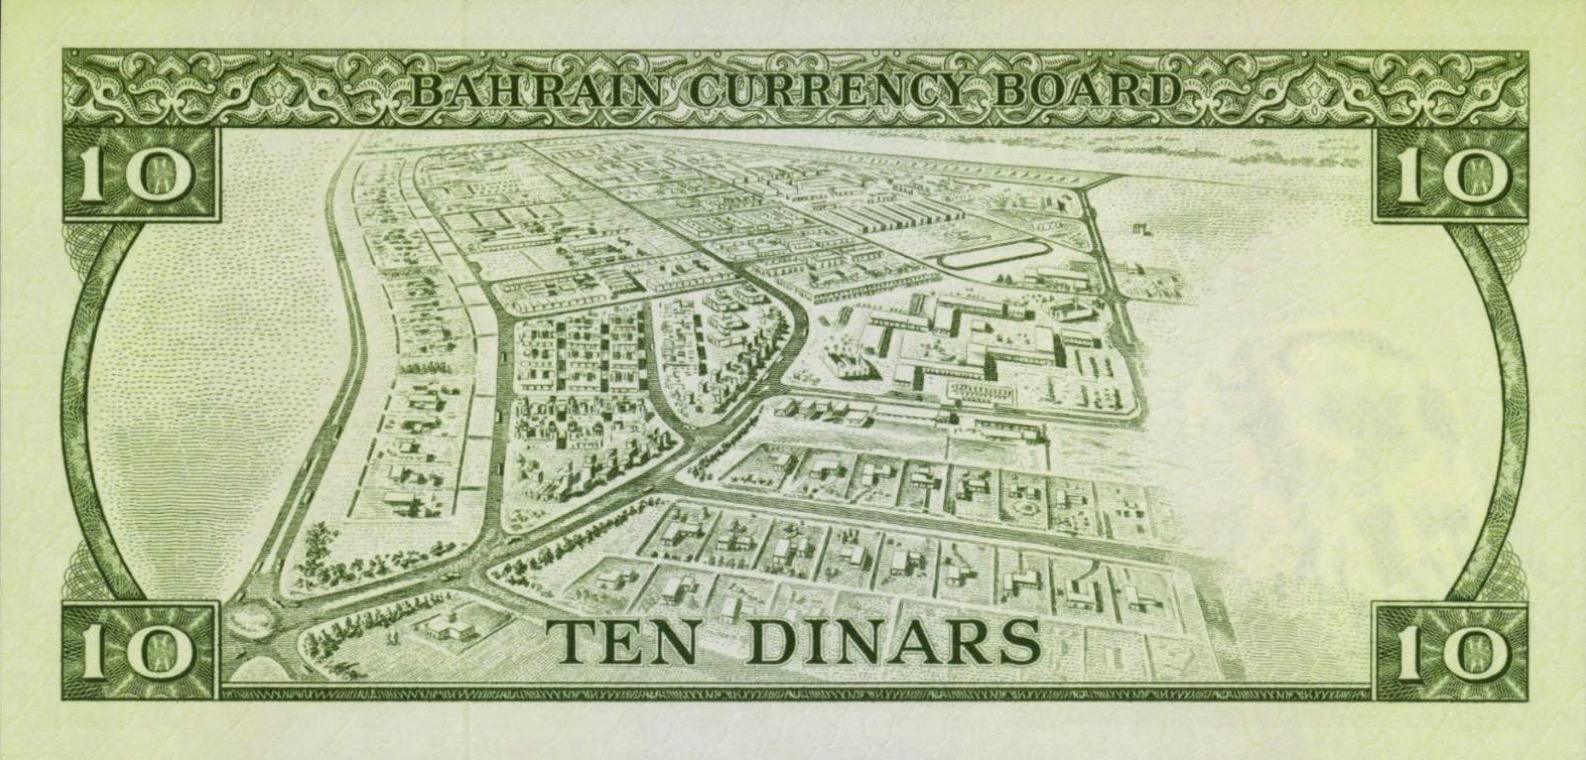 Bahrain Currency Board 10 Dinars banknote (First Issue)